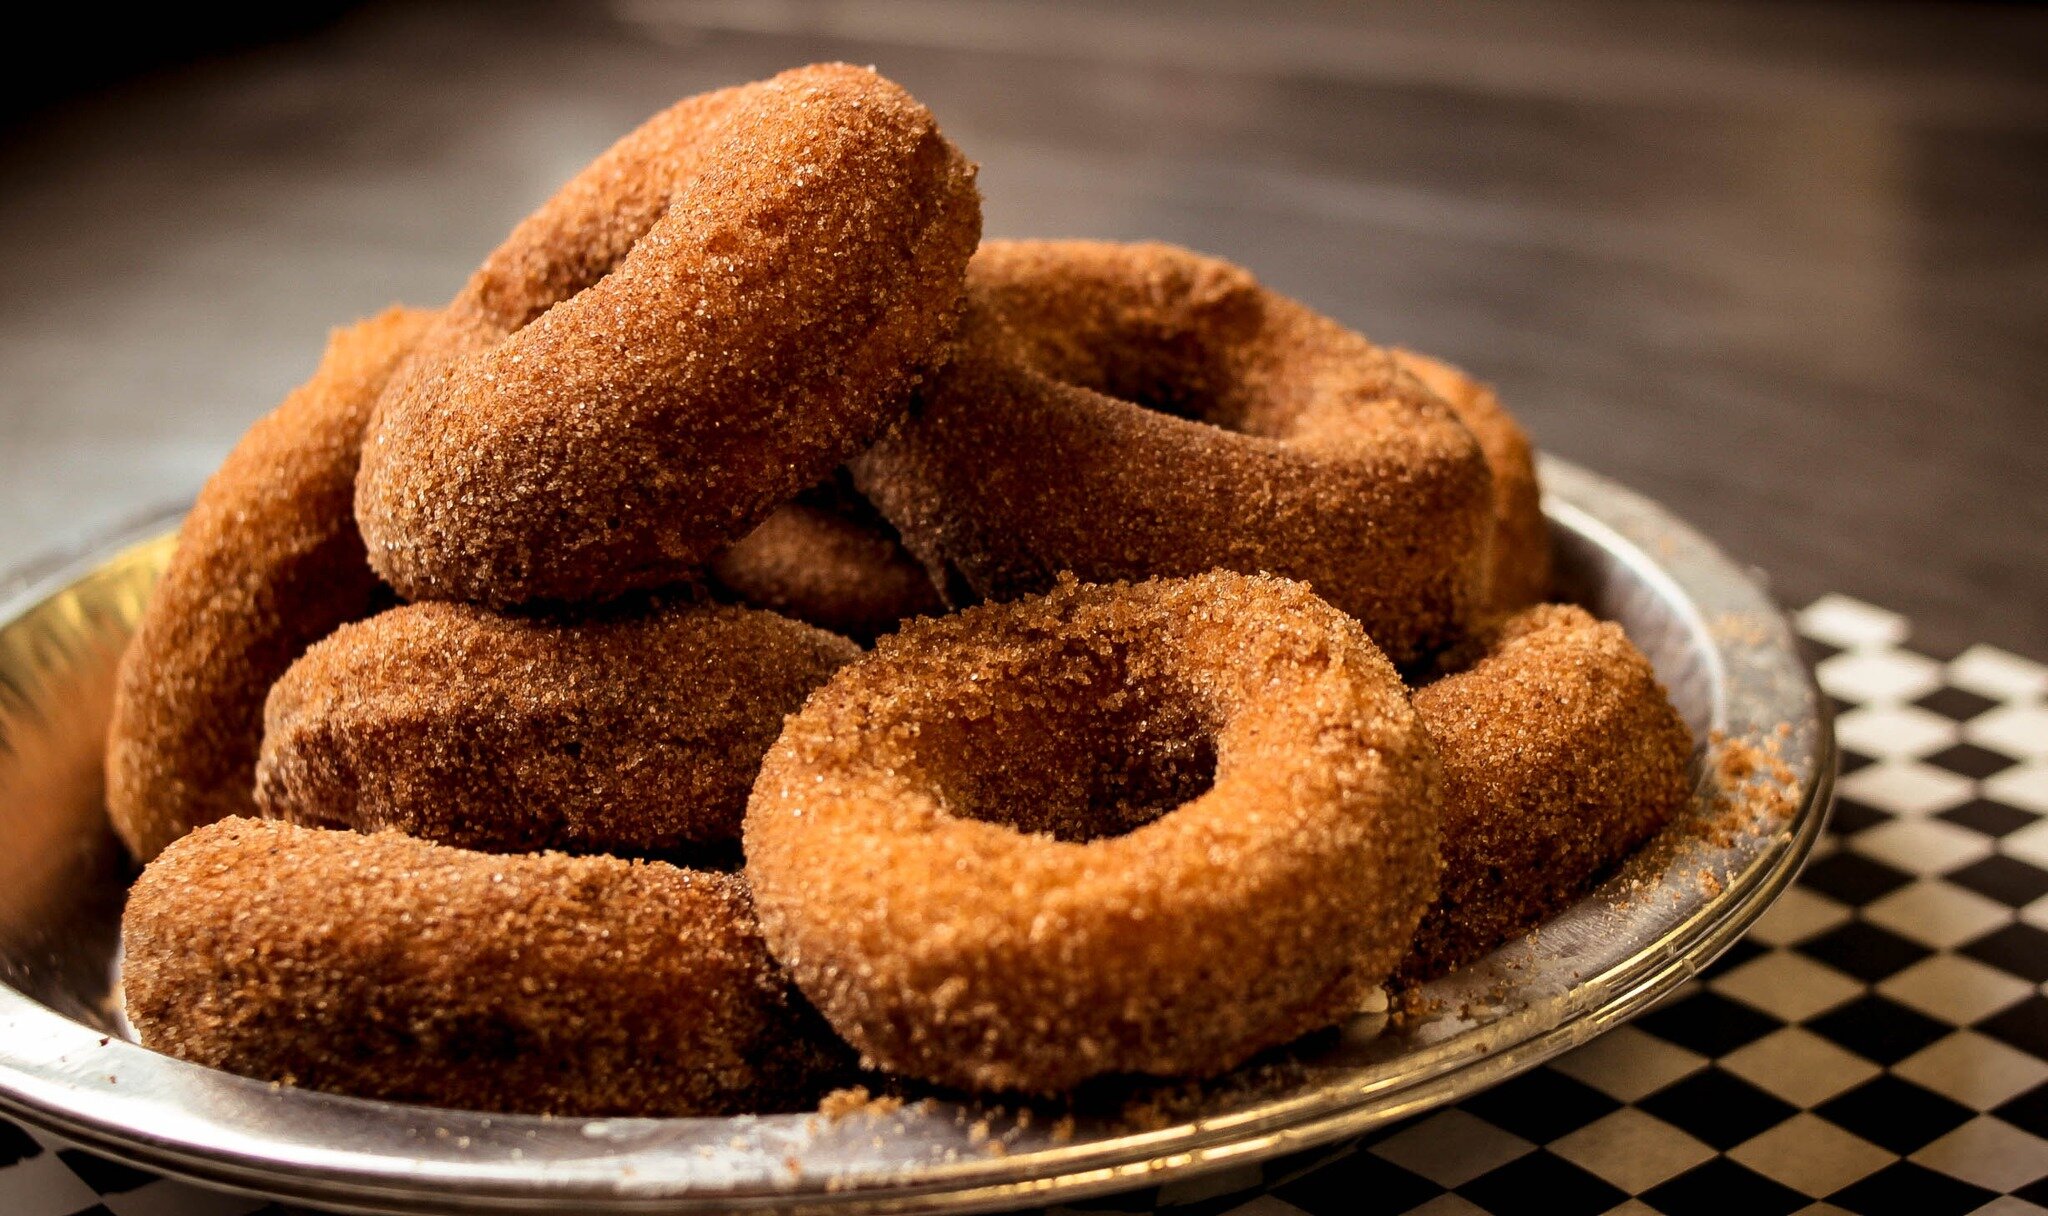 Our fresh and delicious apple cider donuts are back today! The Cannery team has been busy preparing them this morning, so come and enjoy! Available in the market! 🍩
.
.
.
.
.
.
.
.
#AppleCiderDonuts
#DonutLovers
#BakeryLife
#BakedGoods
#SweetTreats
